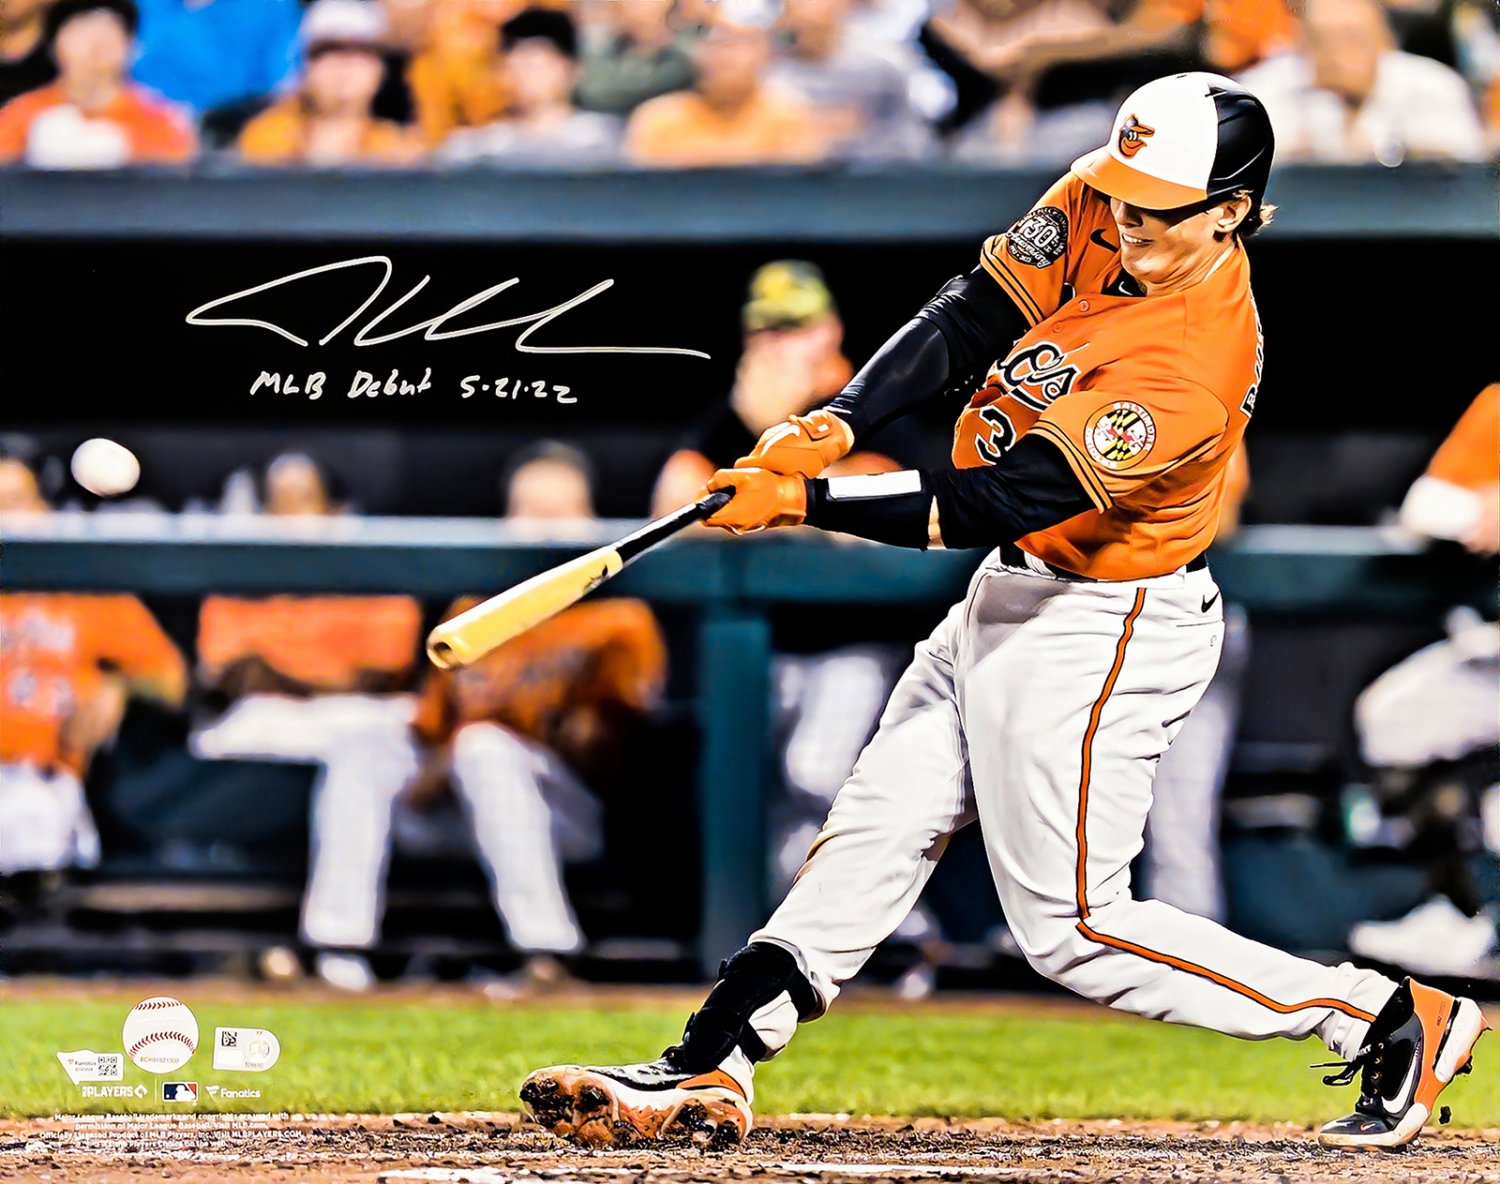 Adley Rutschman Autographed Signed 16X20 Photo Baltimore Orioles Debut  First Hit MLB Debut 5-21-22 Fanatics Holo